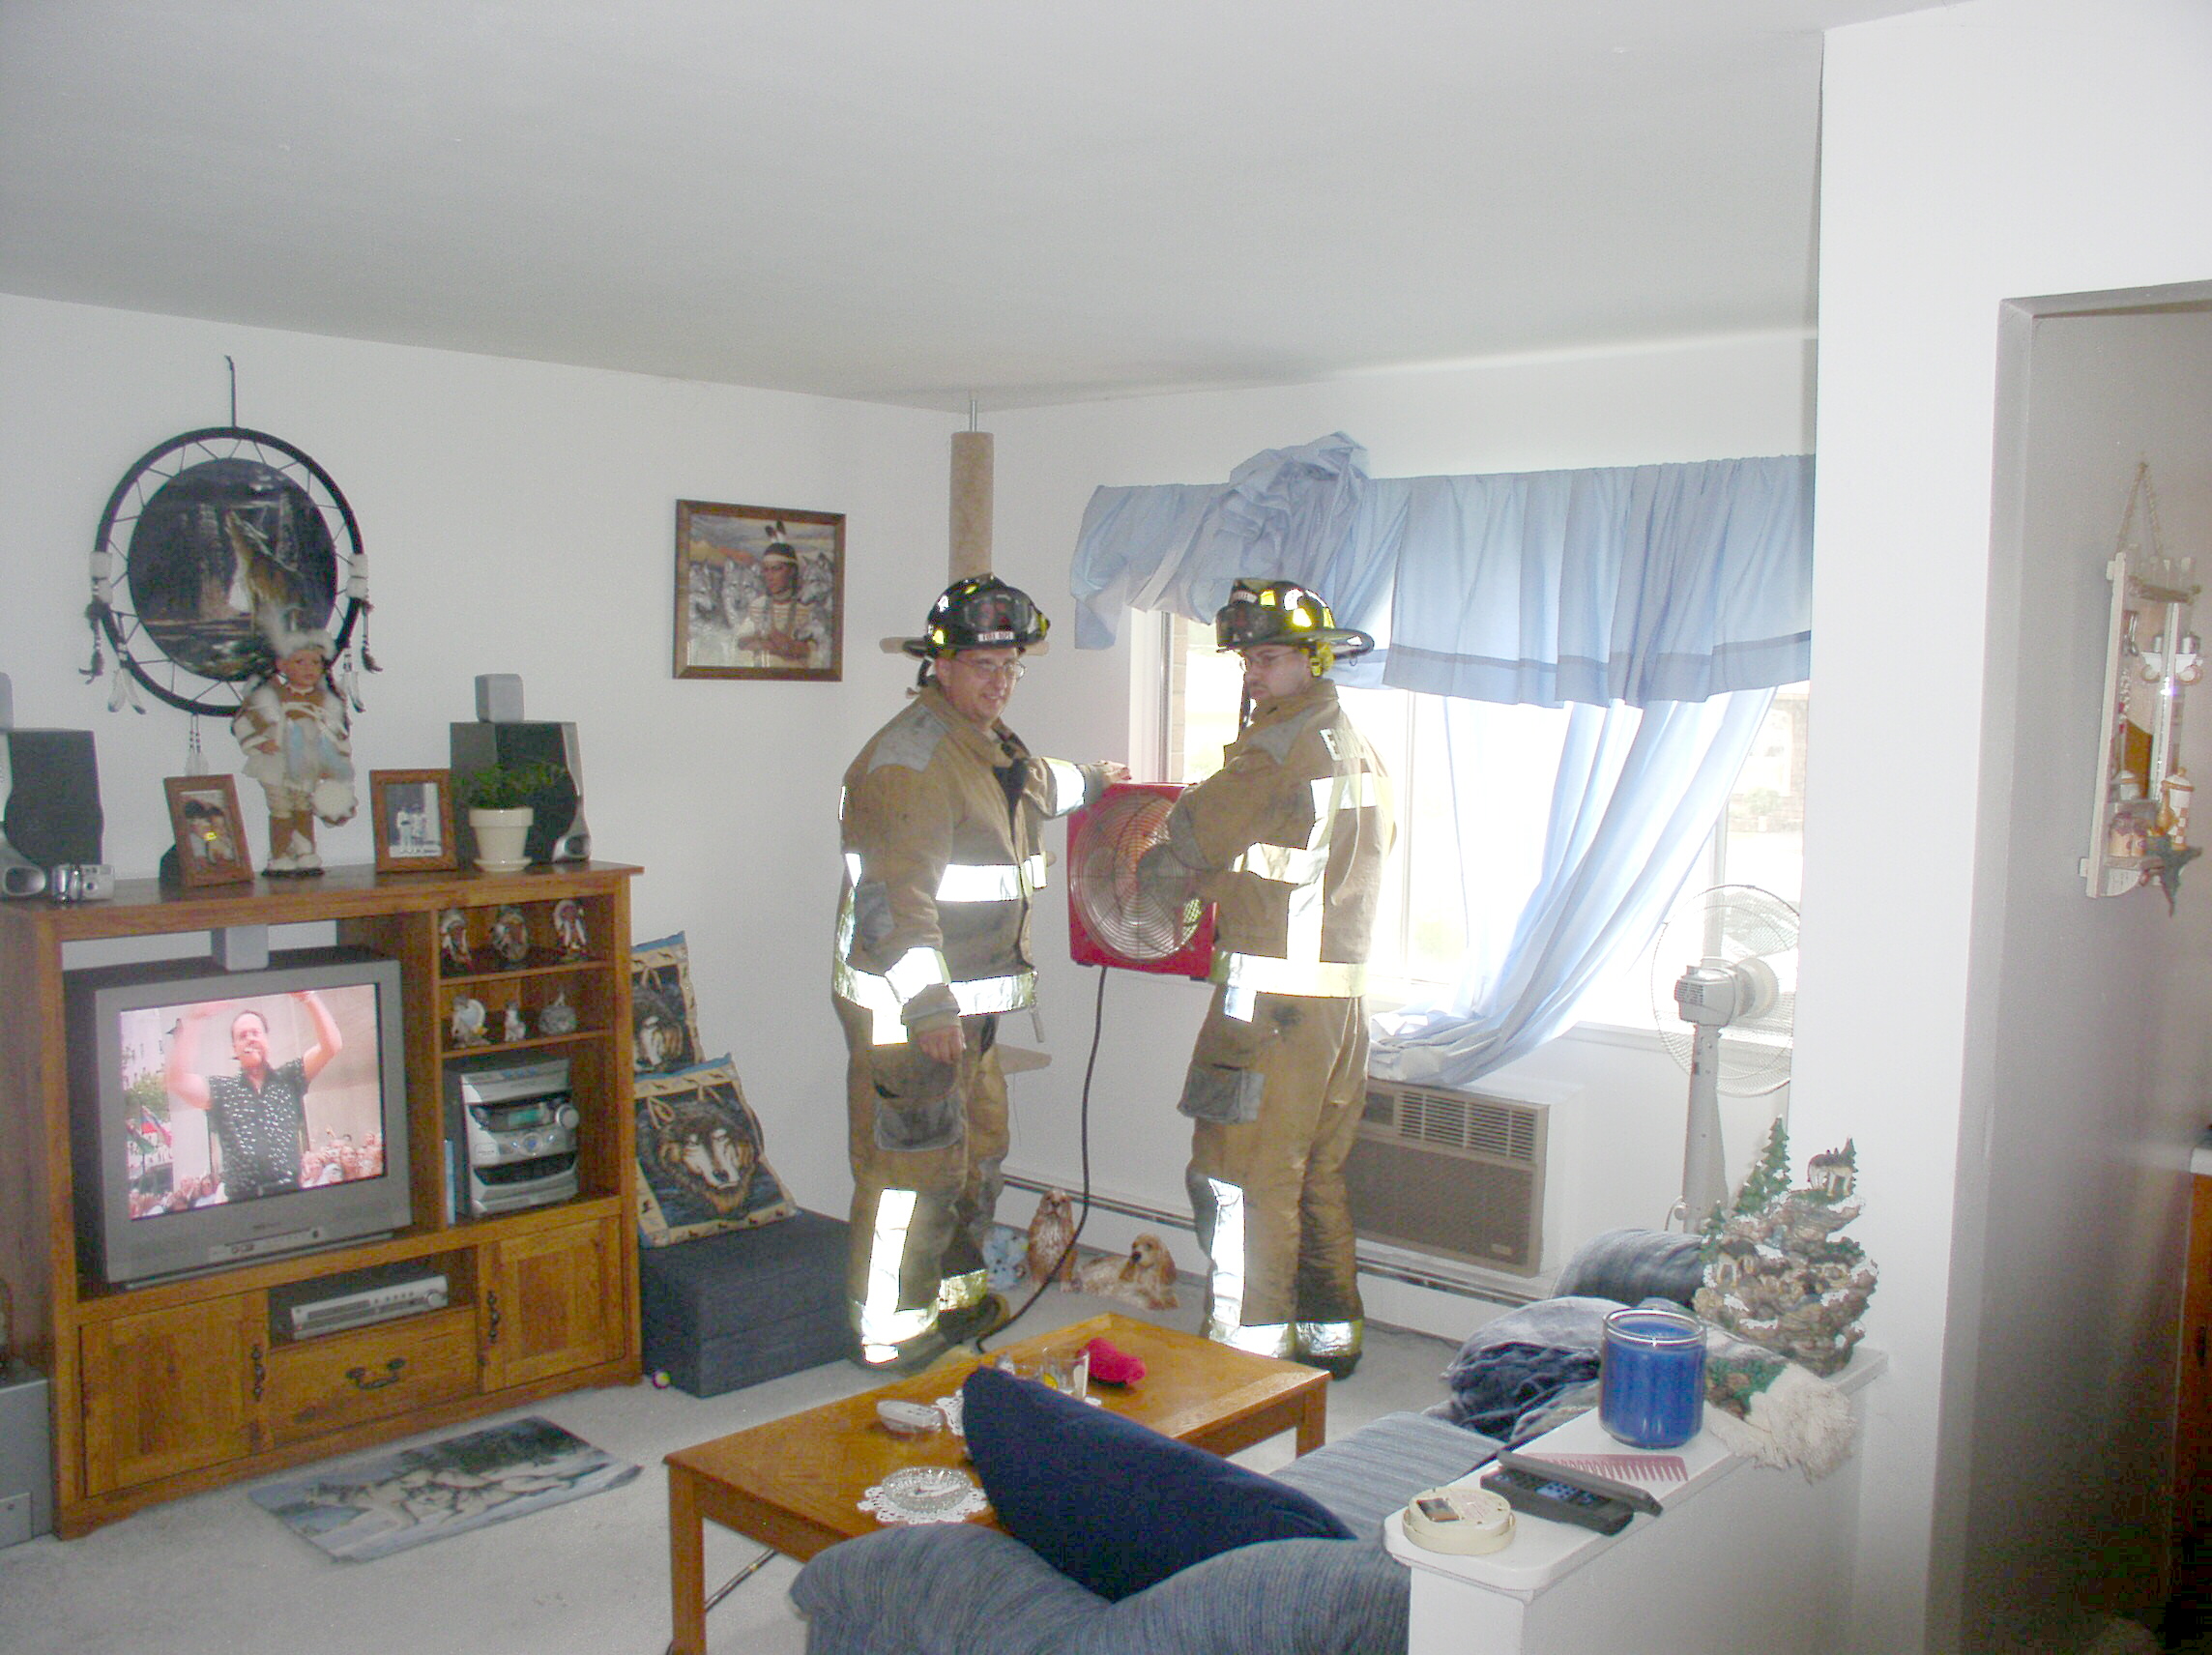 07-31-04  Response - Stove Fire - 1013 Southern Pines